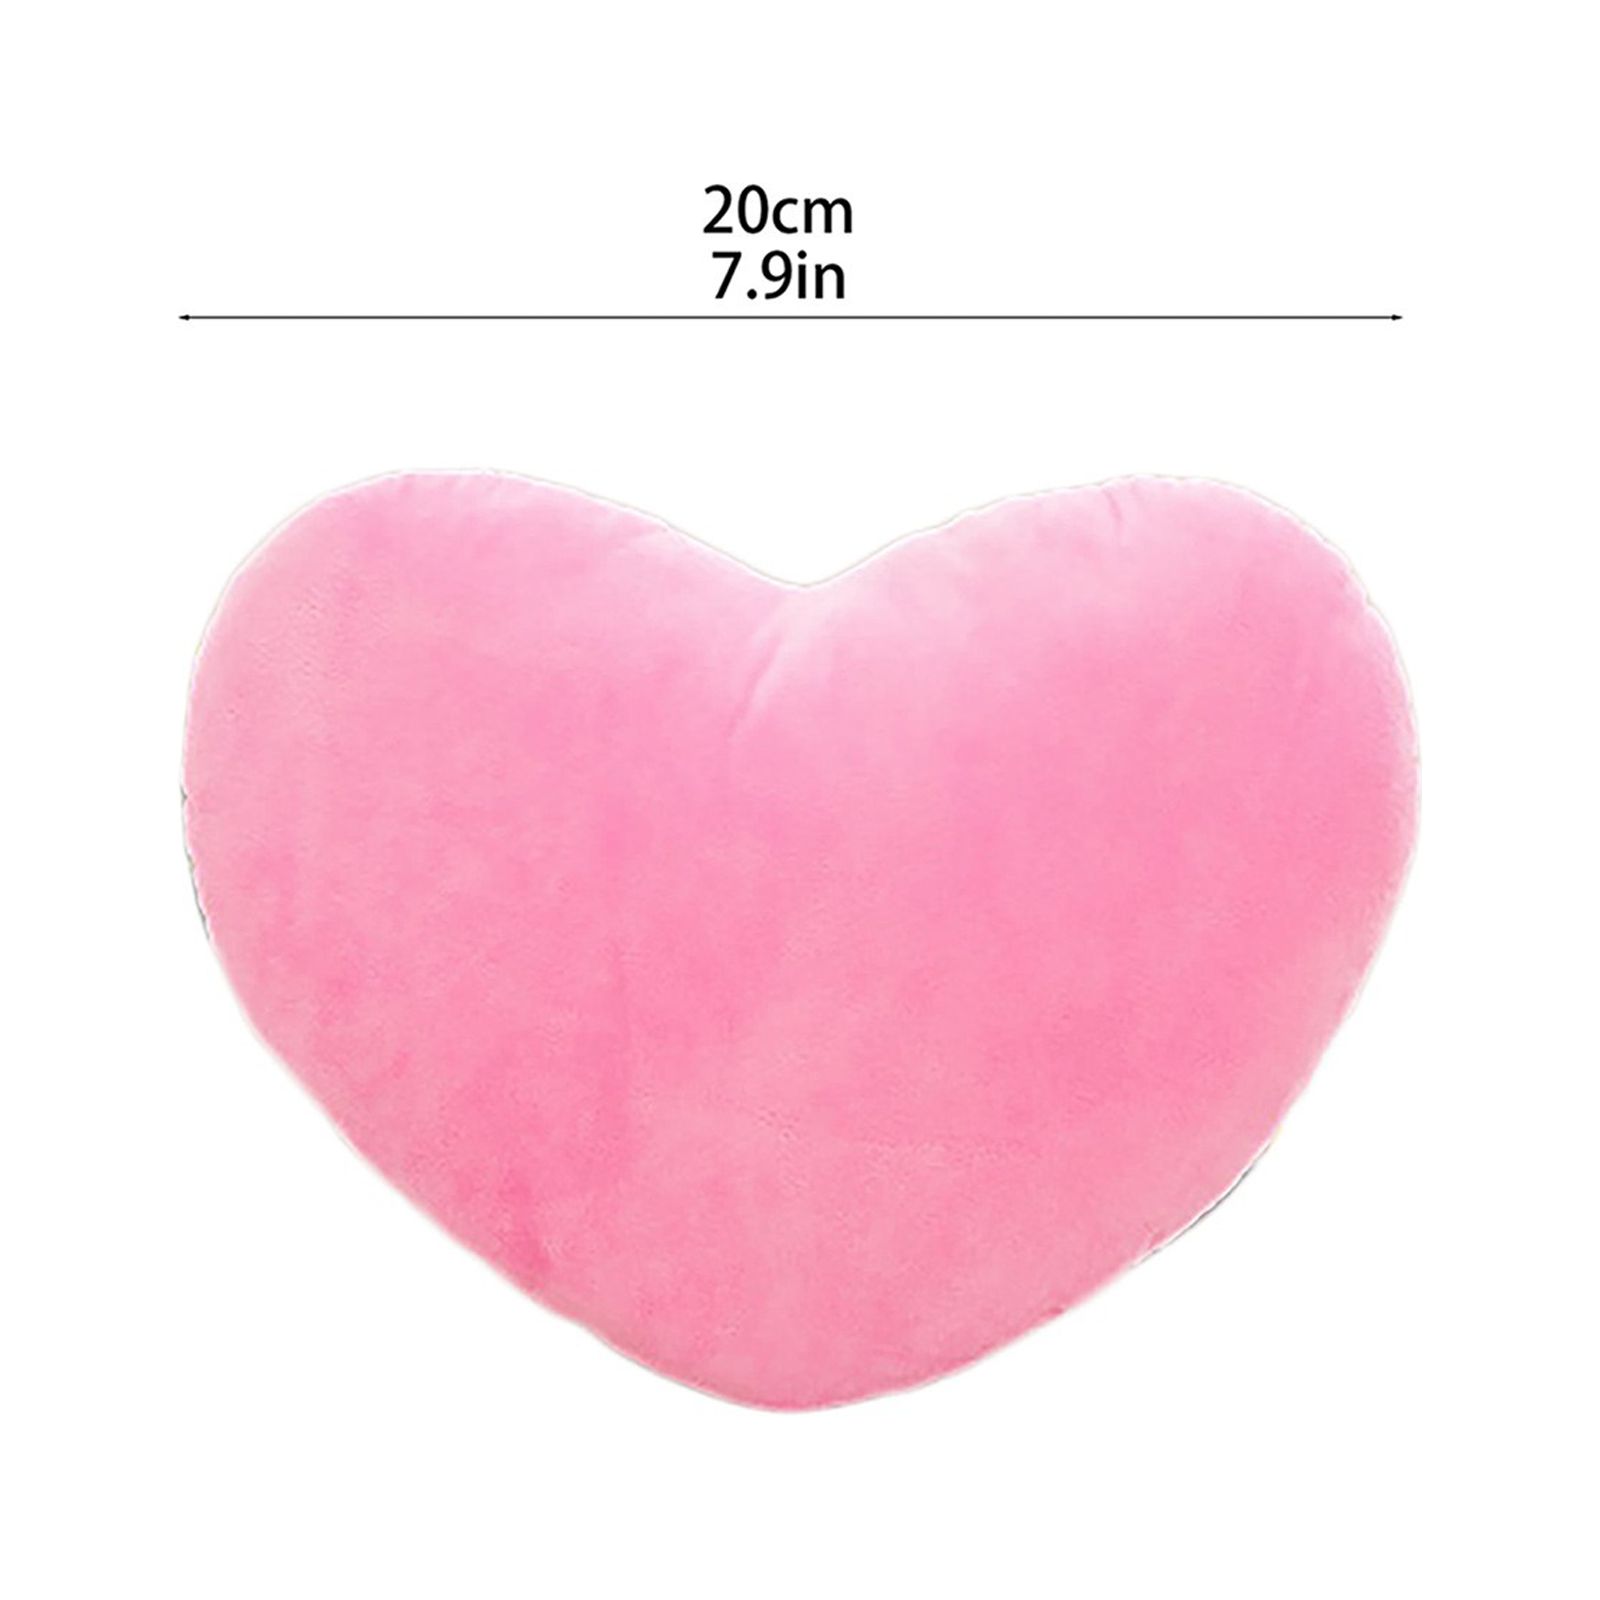 Body Pillow For Kids Steady 20cmPlush Heart Shape Cushion Throw Decorative Back Cushions For Gift For Valentine's Day - image 2 of 3